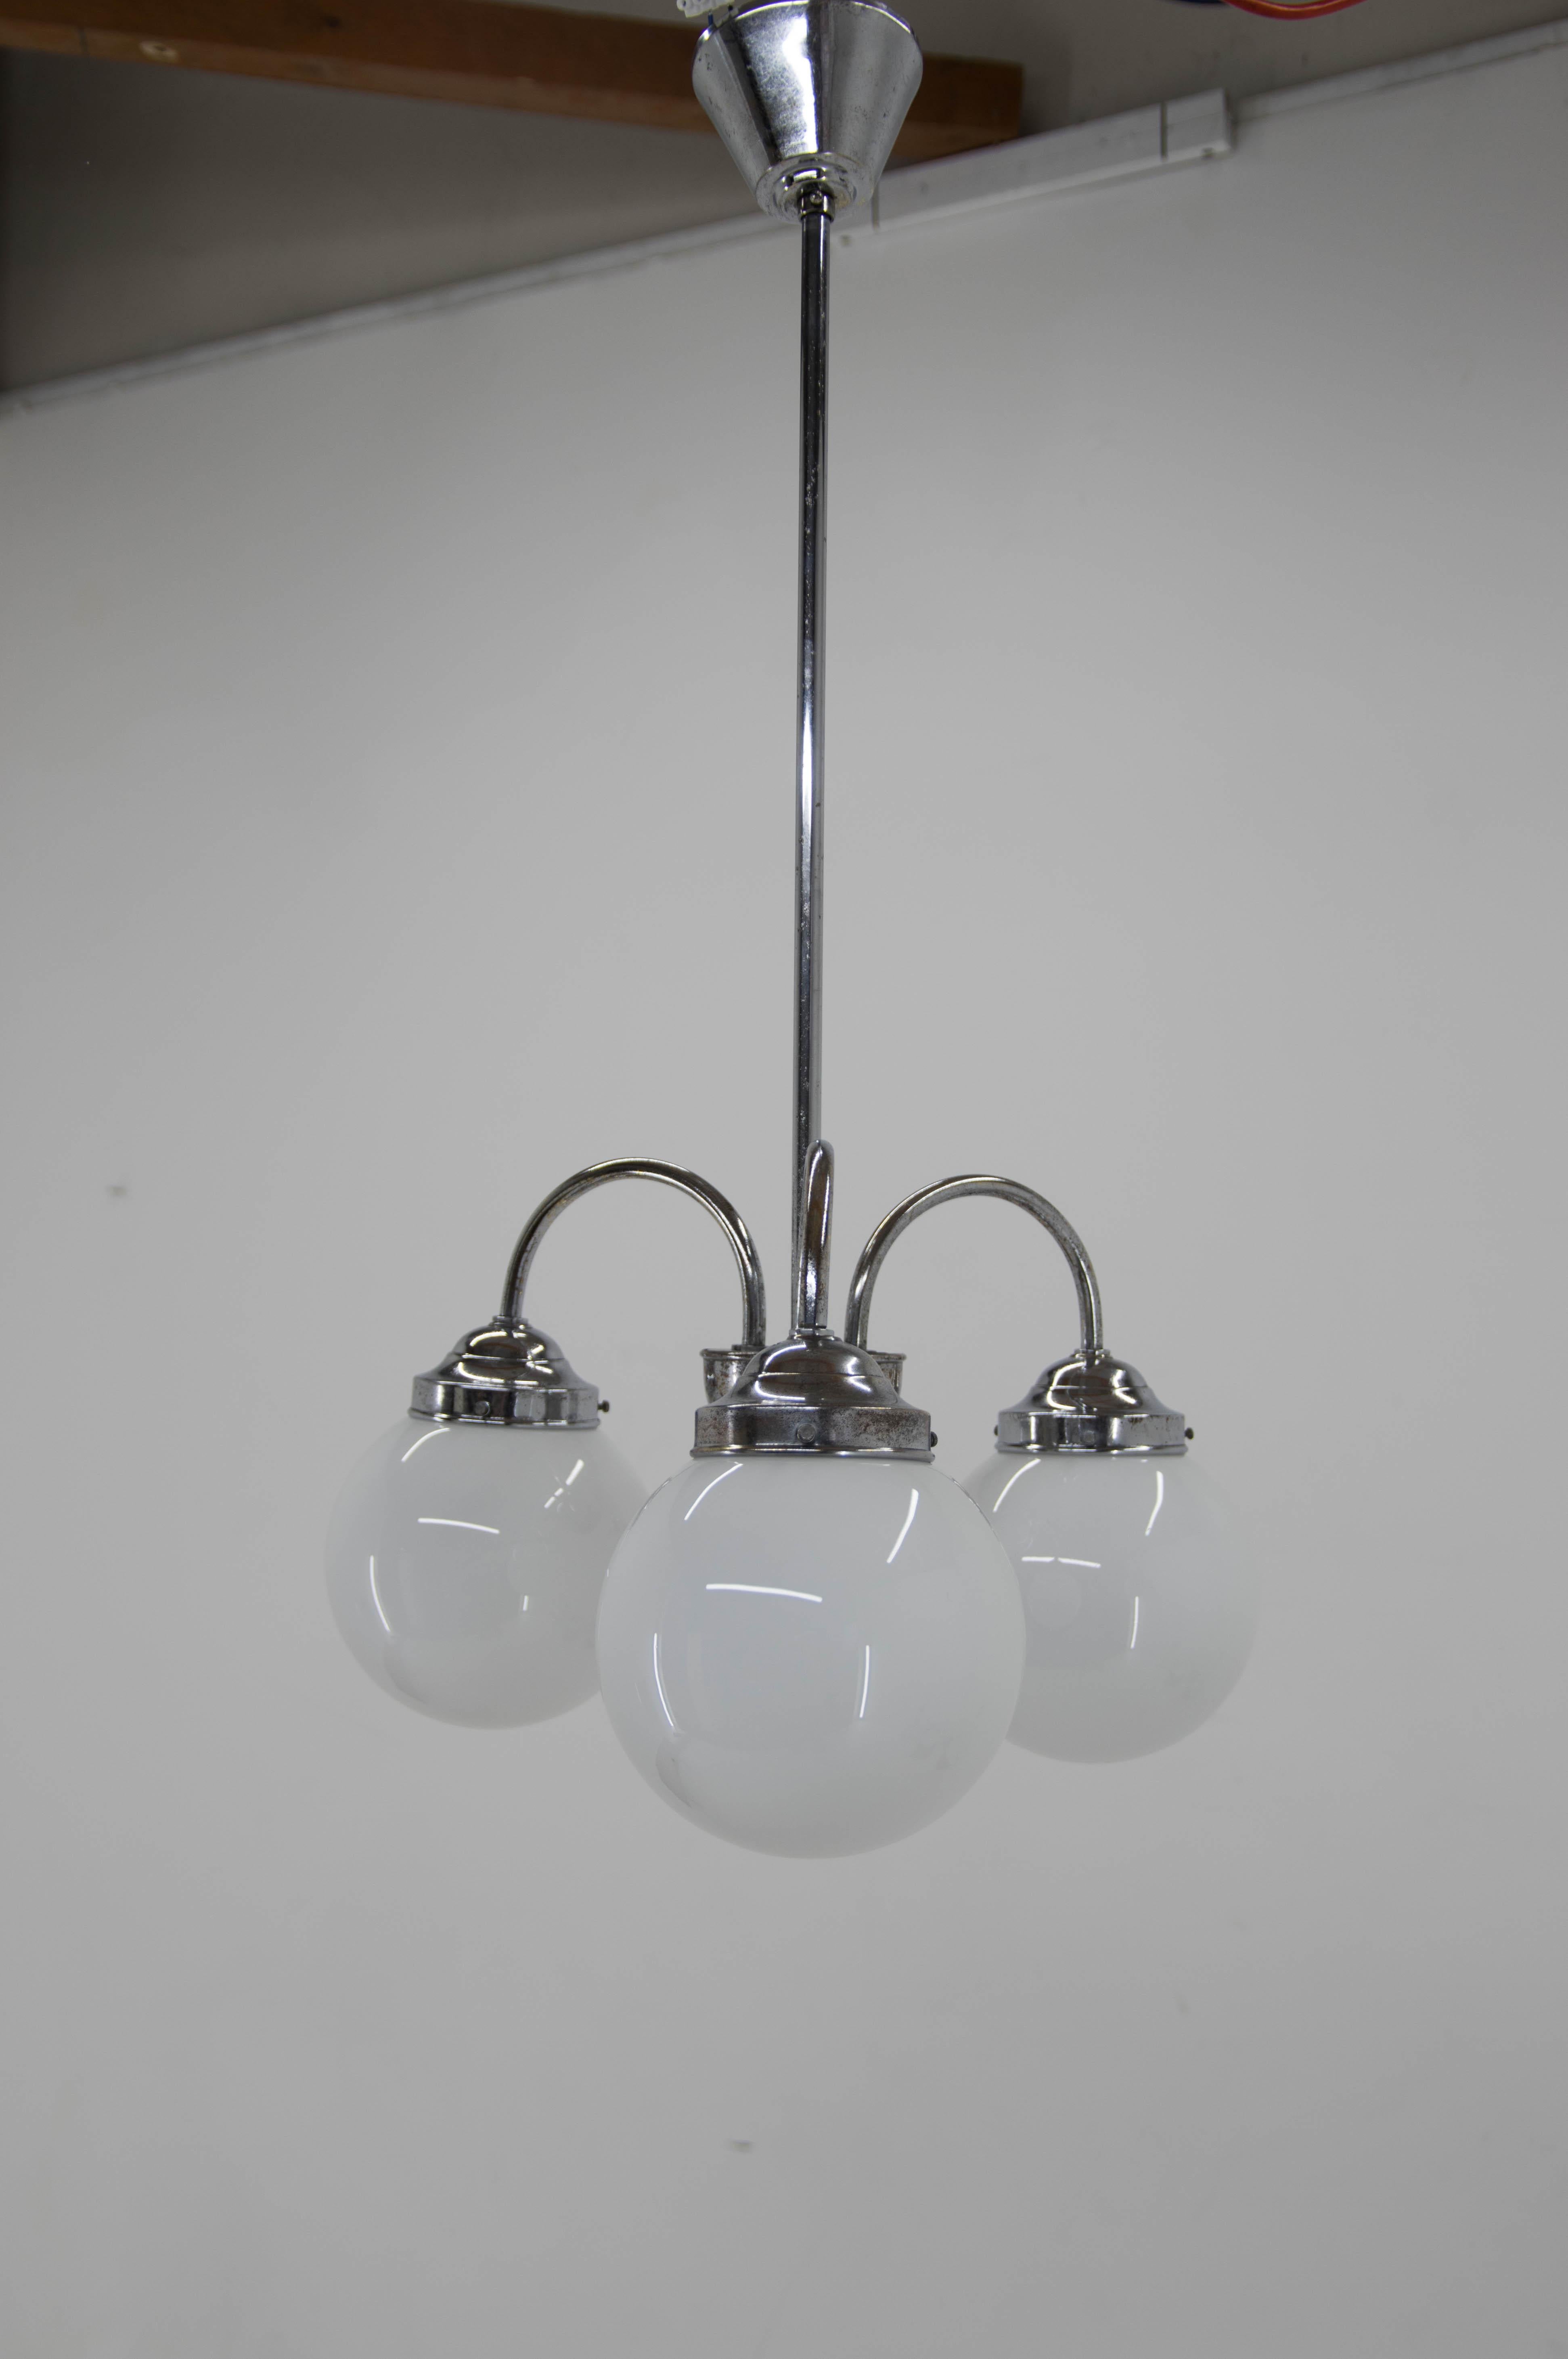 3-flamming chrome Art Deco chandelier.
Restored: chrome with heavy age patina cleaned and polished.
Rewired: 3x40W, E25-E27 bulbs
US wiring compatible